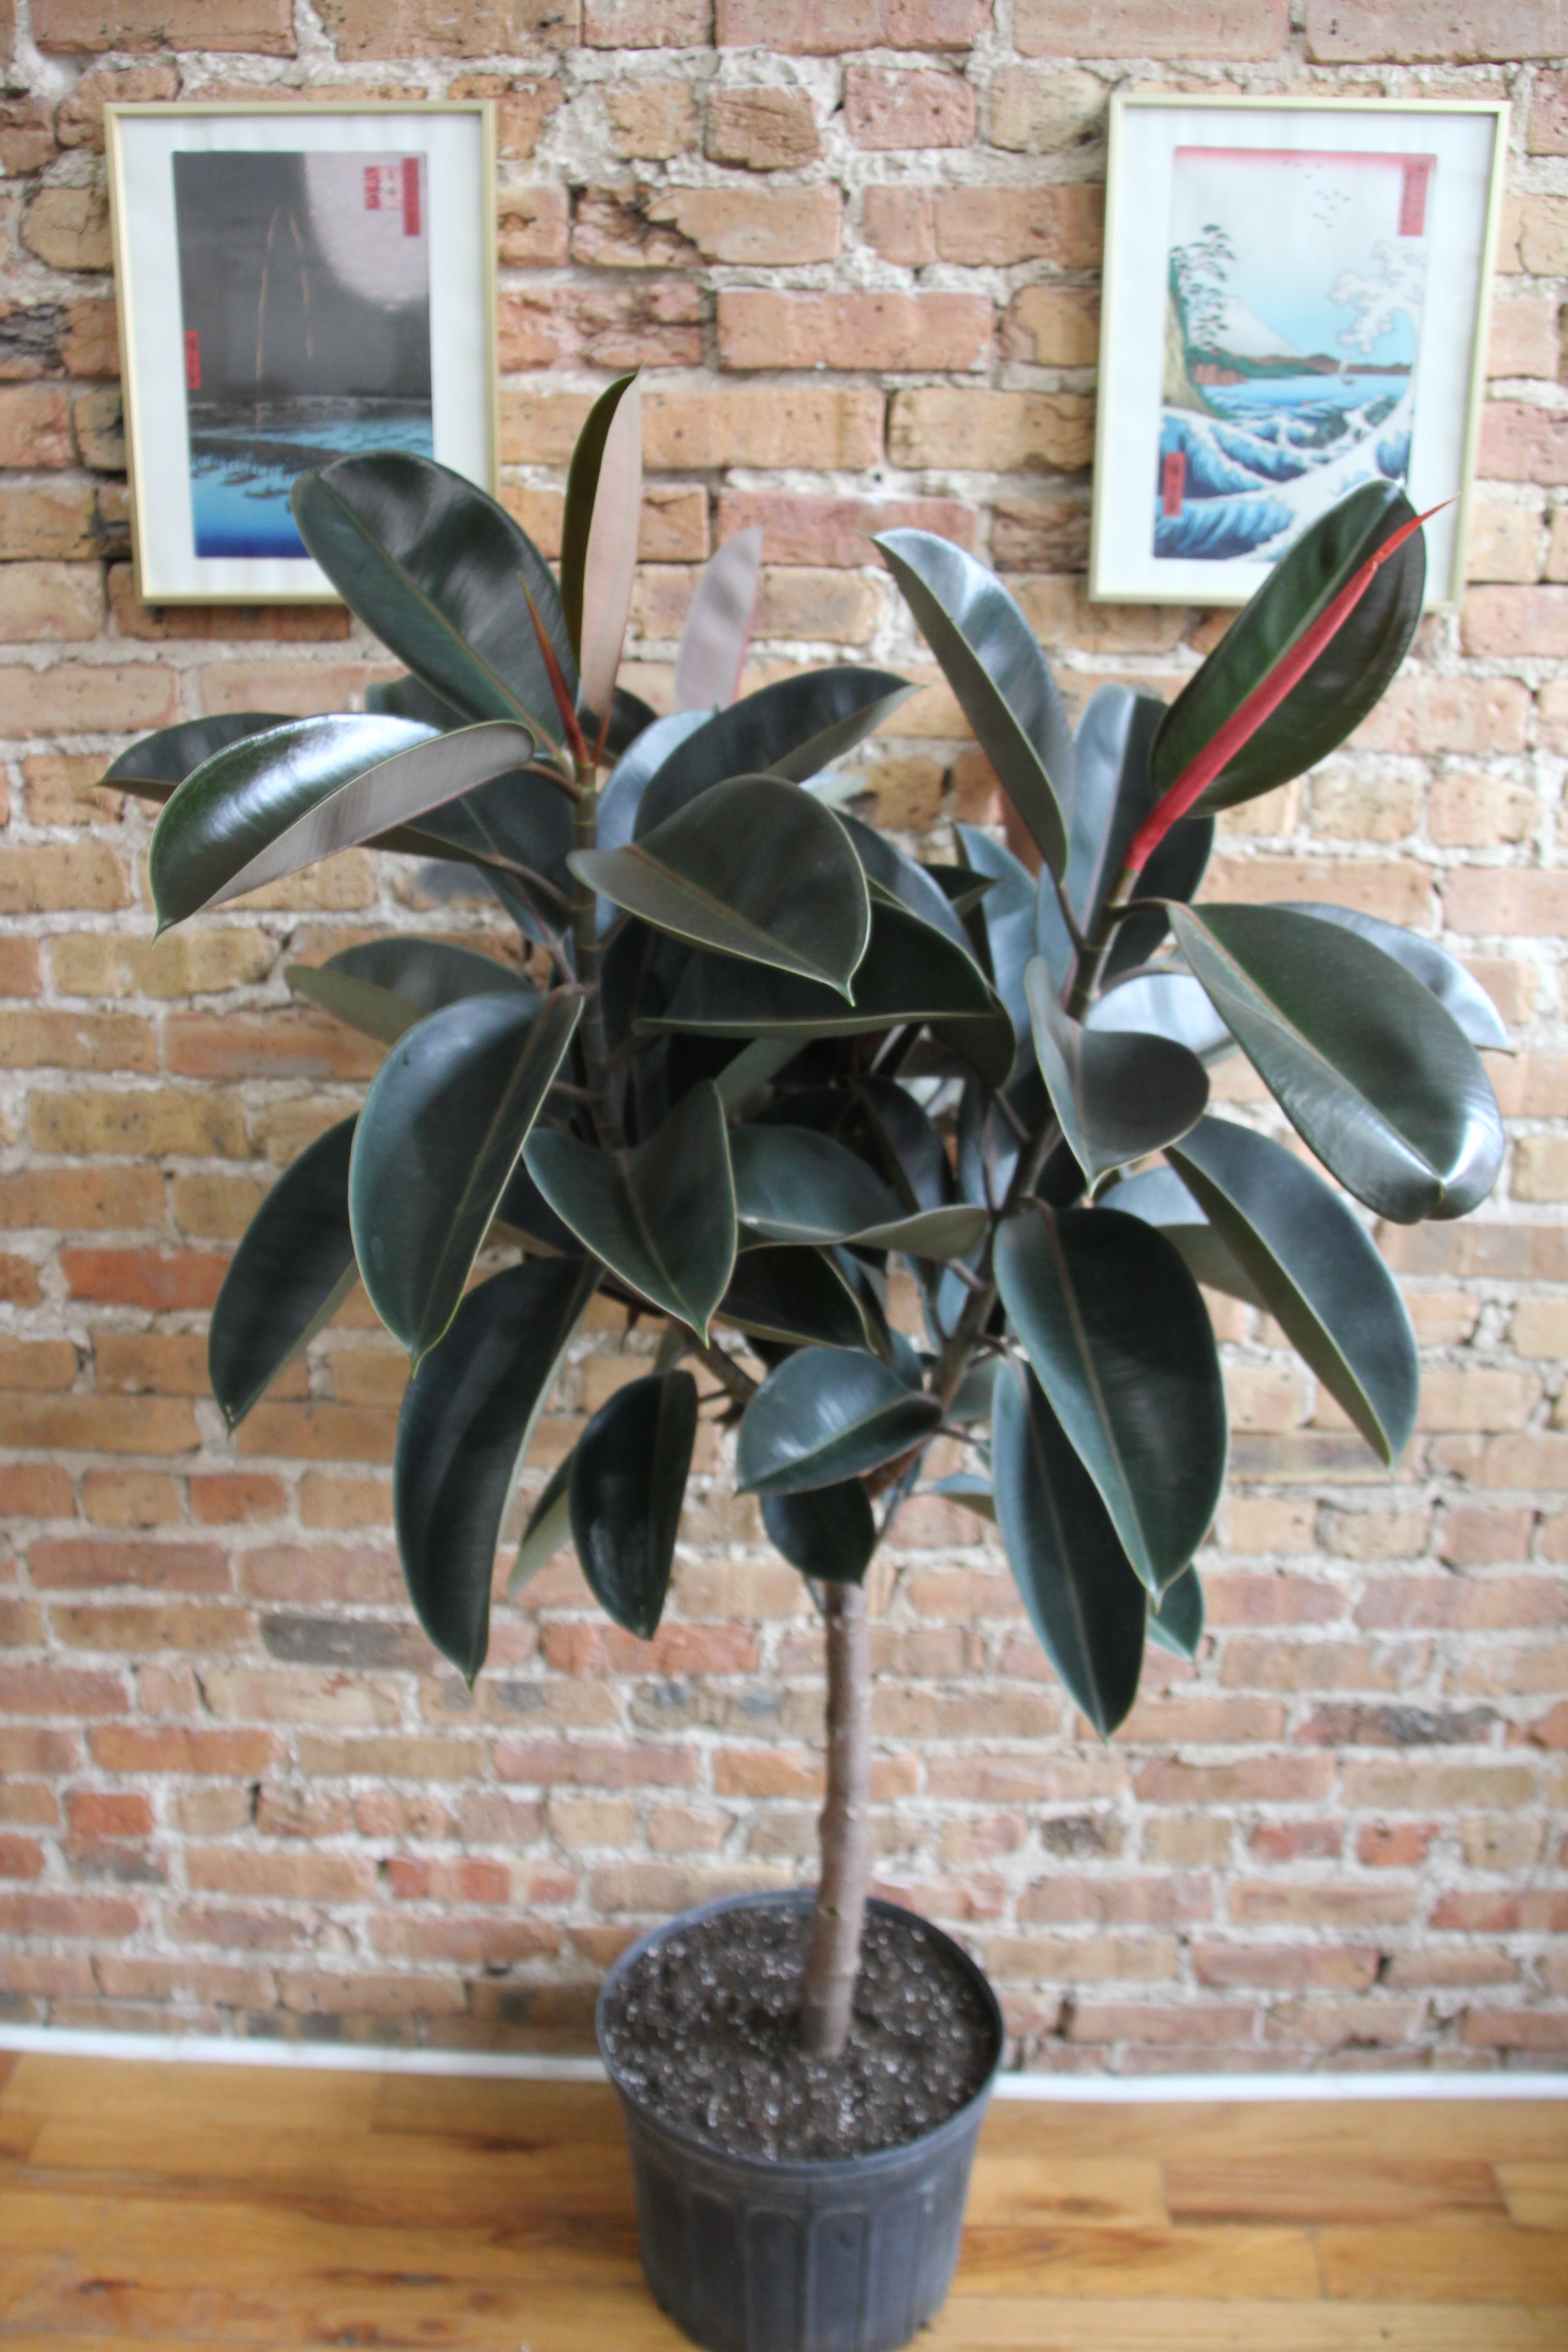 Rubber Plant Care: Tips on Water, Light and Soil for Ficus Elastica